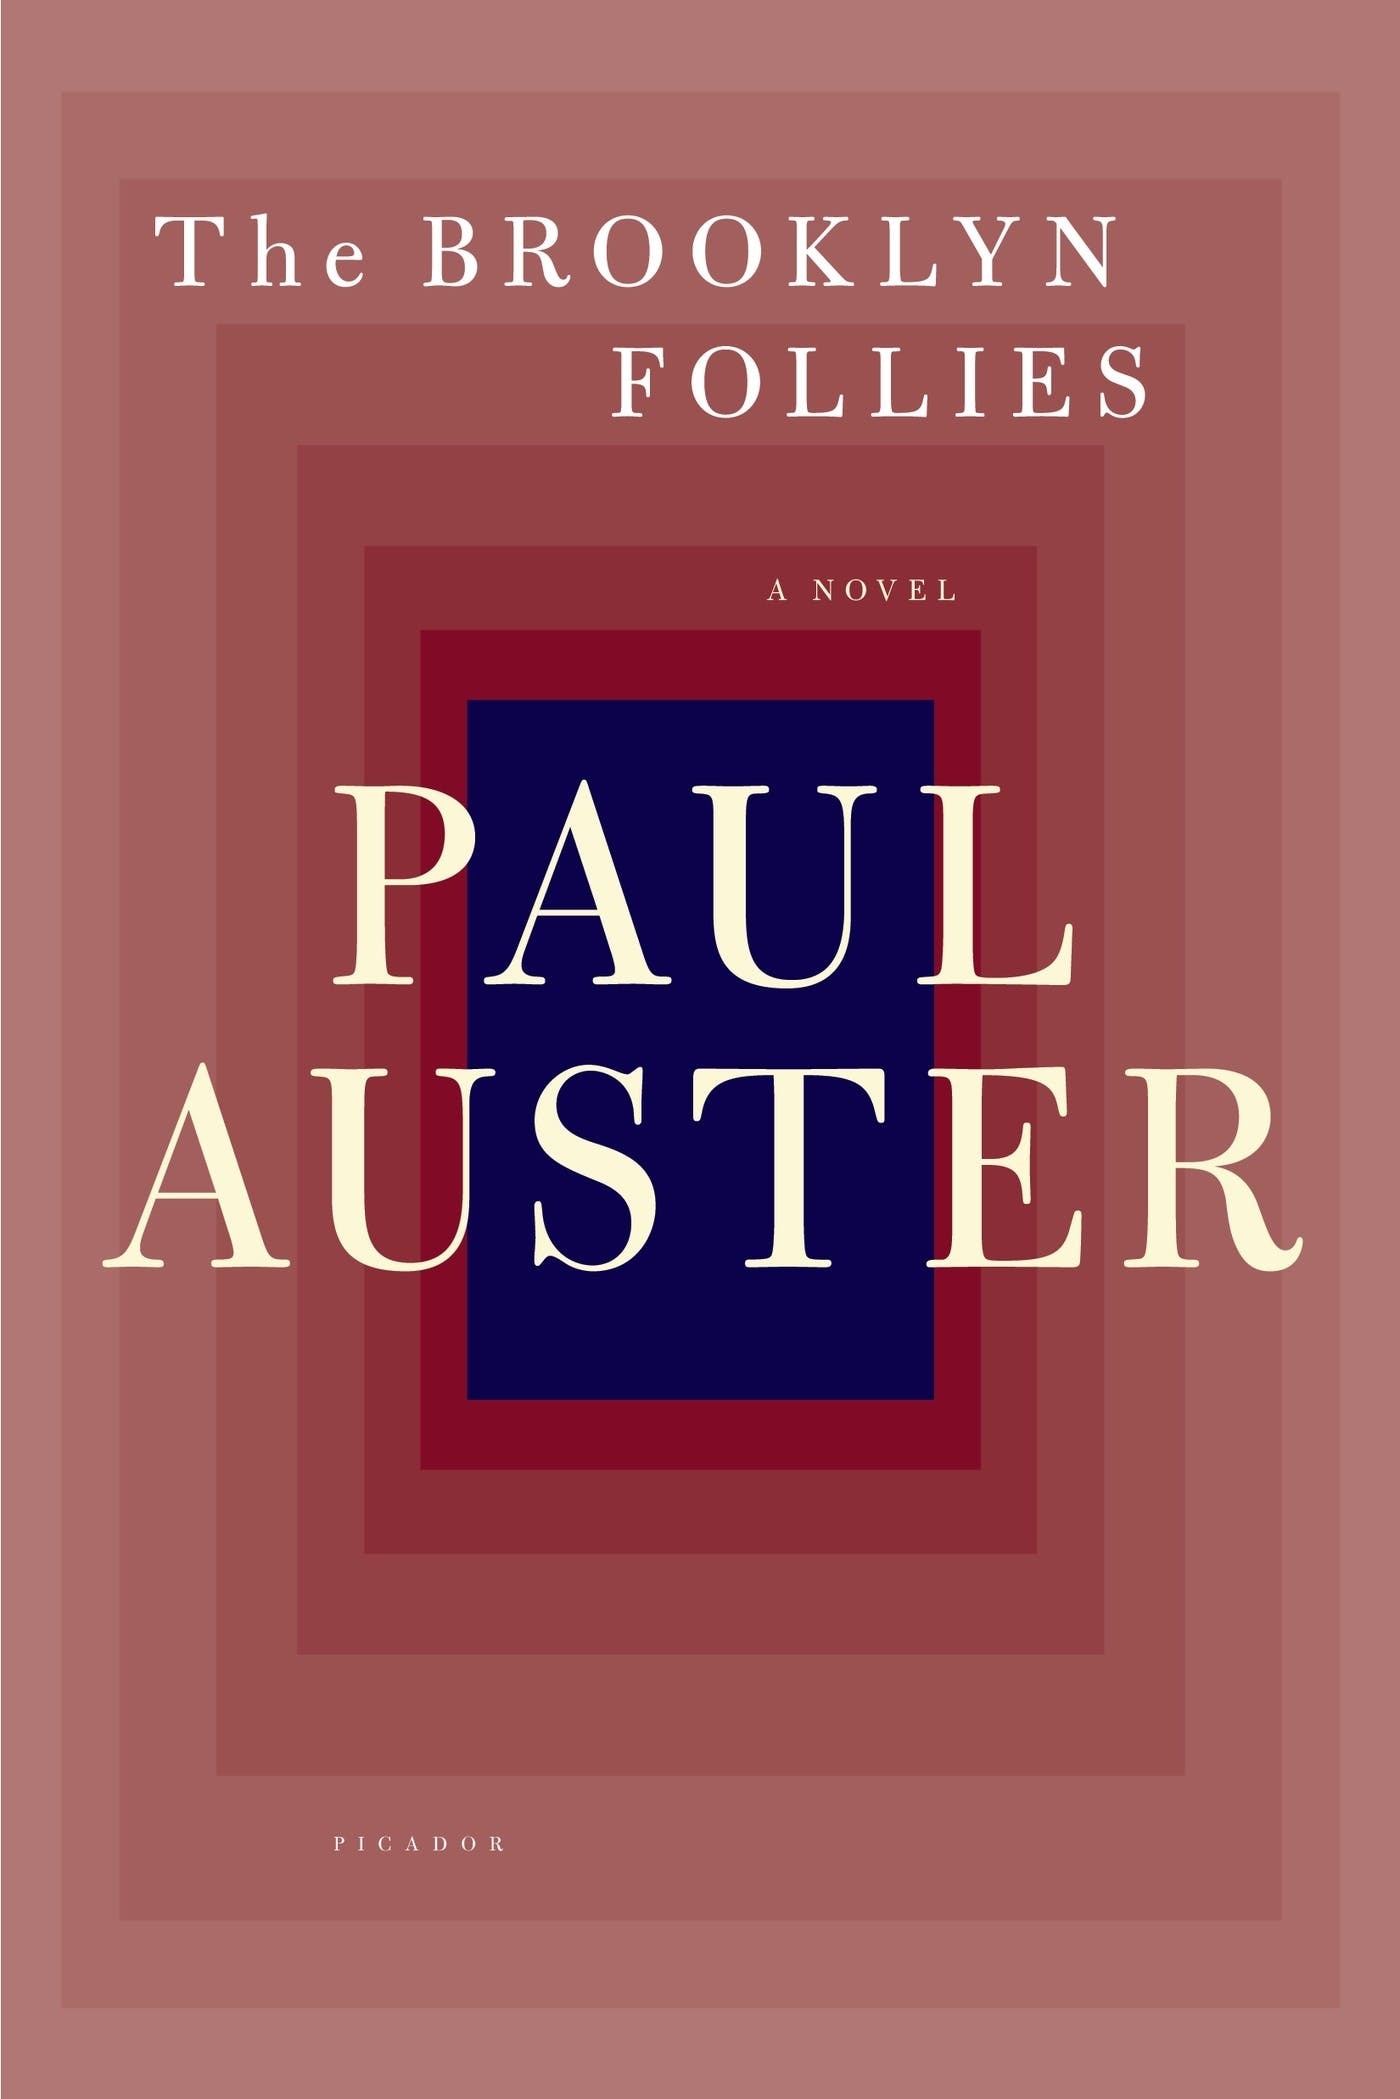 Book “The Brooklyn Follies” by Paul Auster — October 27, 2009